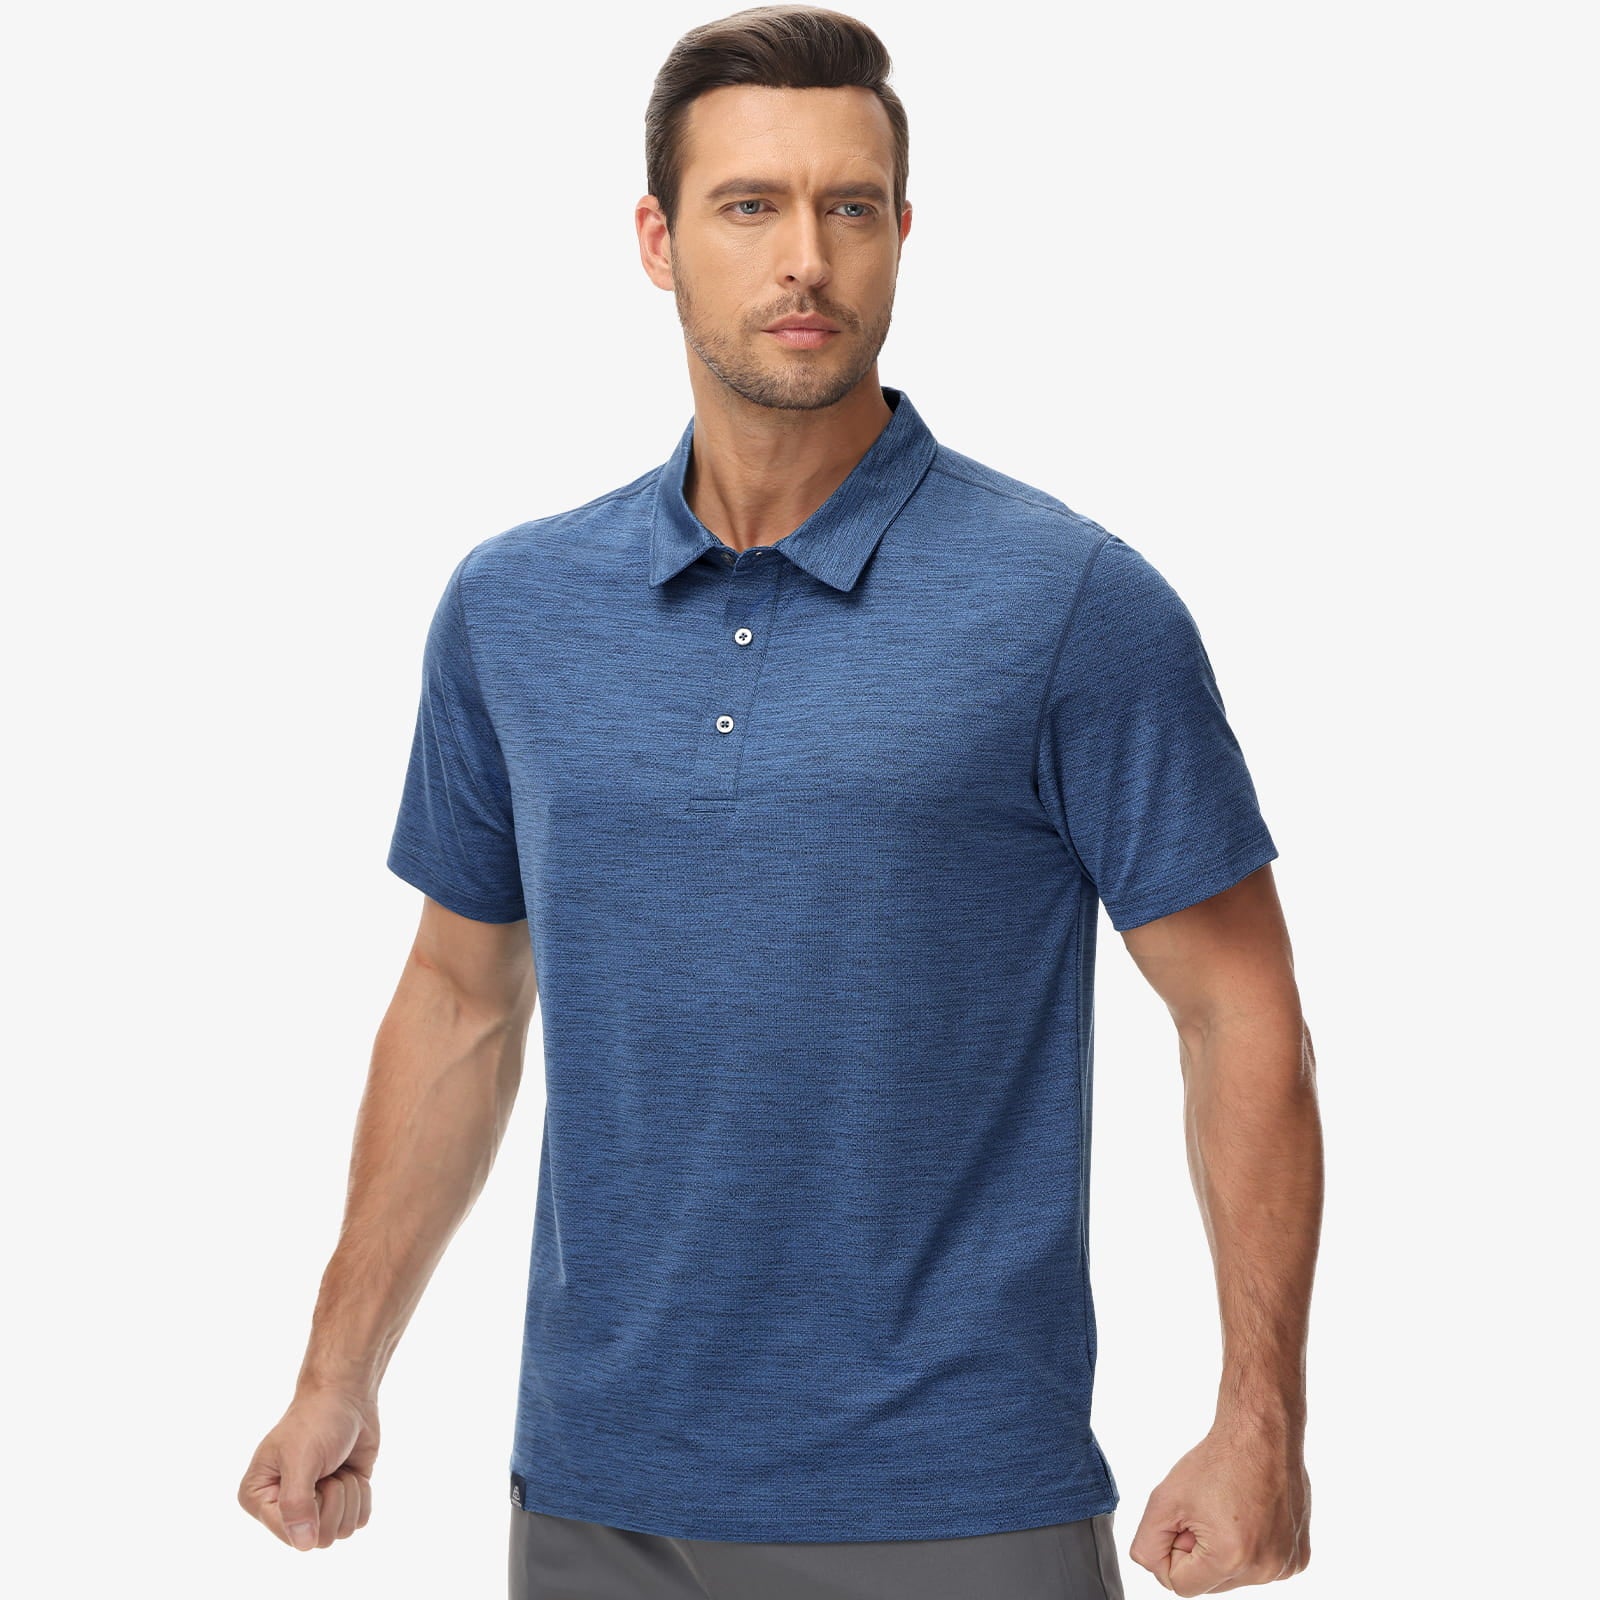 Haimont Men's Polo Shirts Dry Fit Golf Collared Shirt